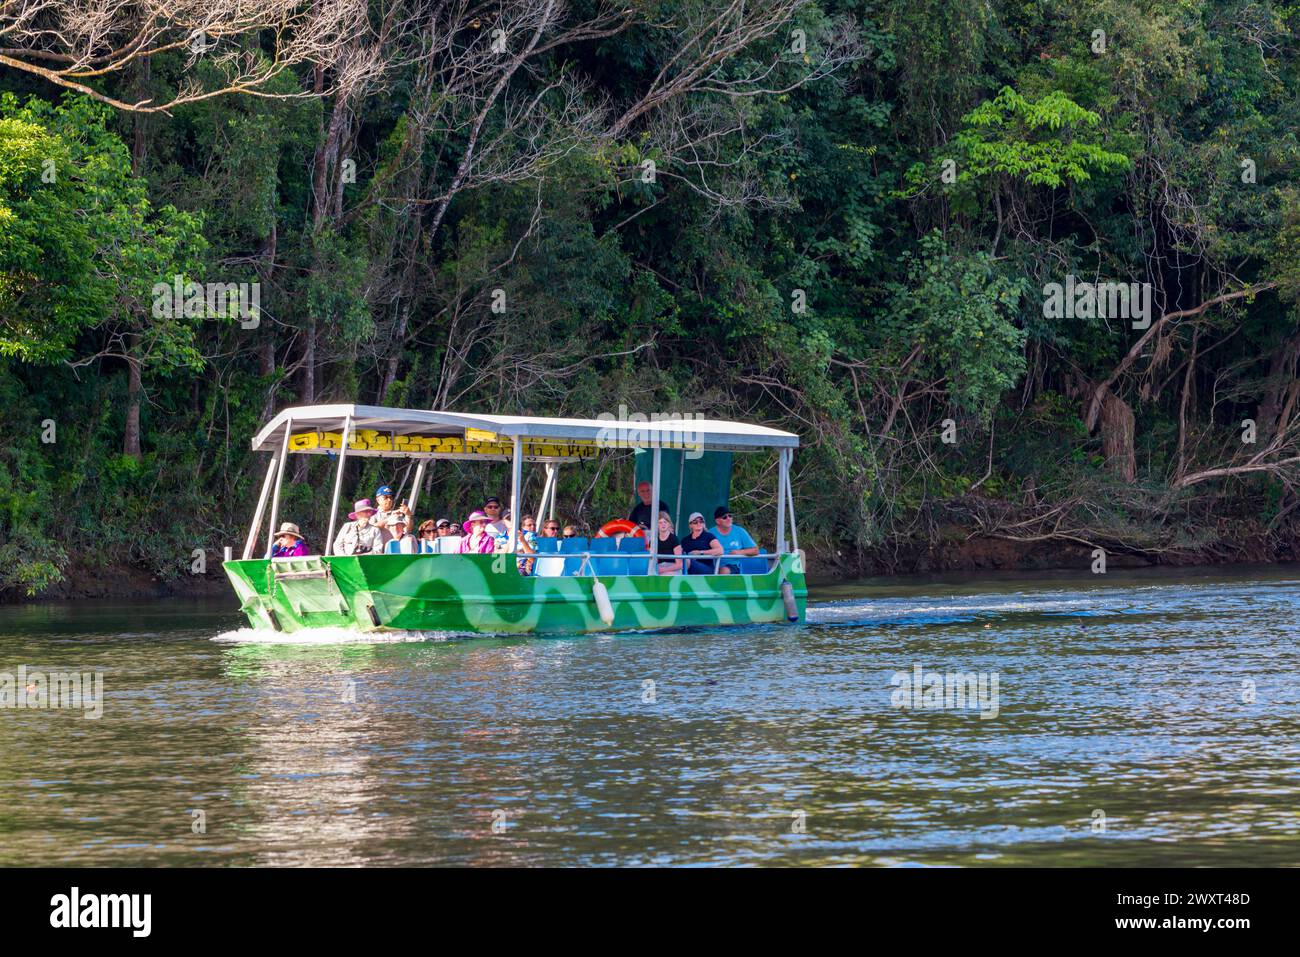 A tourist boat looking for crocodiles on the Daintree River in Far North Queensland, Australia Stock Photo